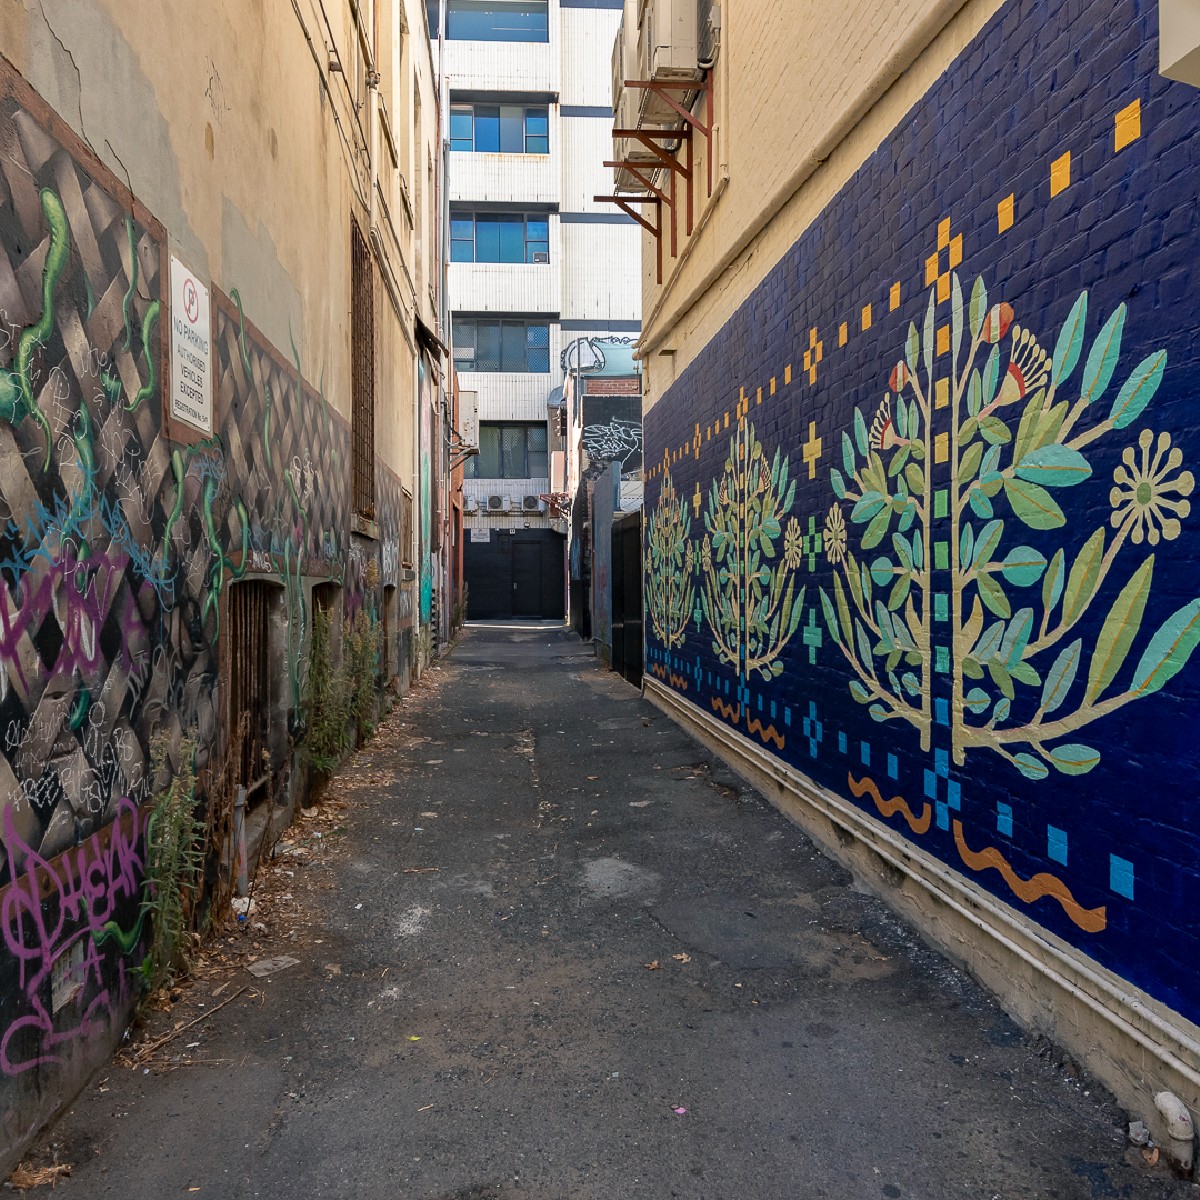 A new mural has emerged in the City’s east end. 🎨 Located in a Pier Street Laneway at the back of Hay Street, the mural by local artist Joanna Brown celebrates the cooling effect of trees. The mural promotes the importance of protecting our existing urban forest. 🌳🍃